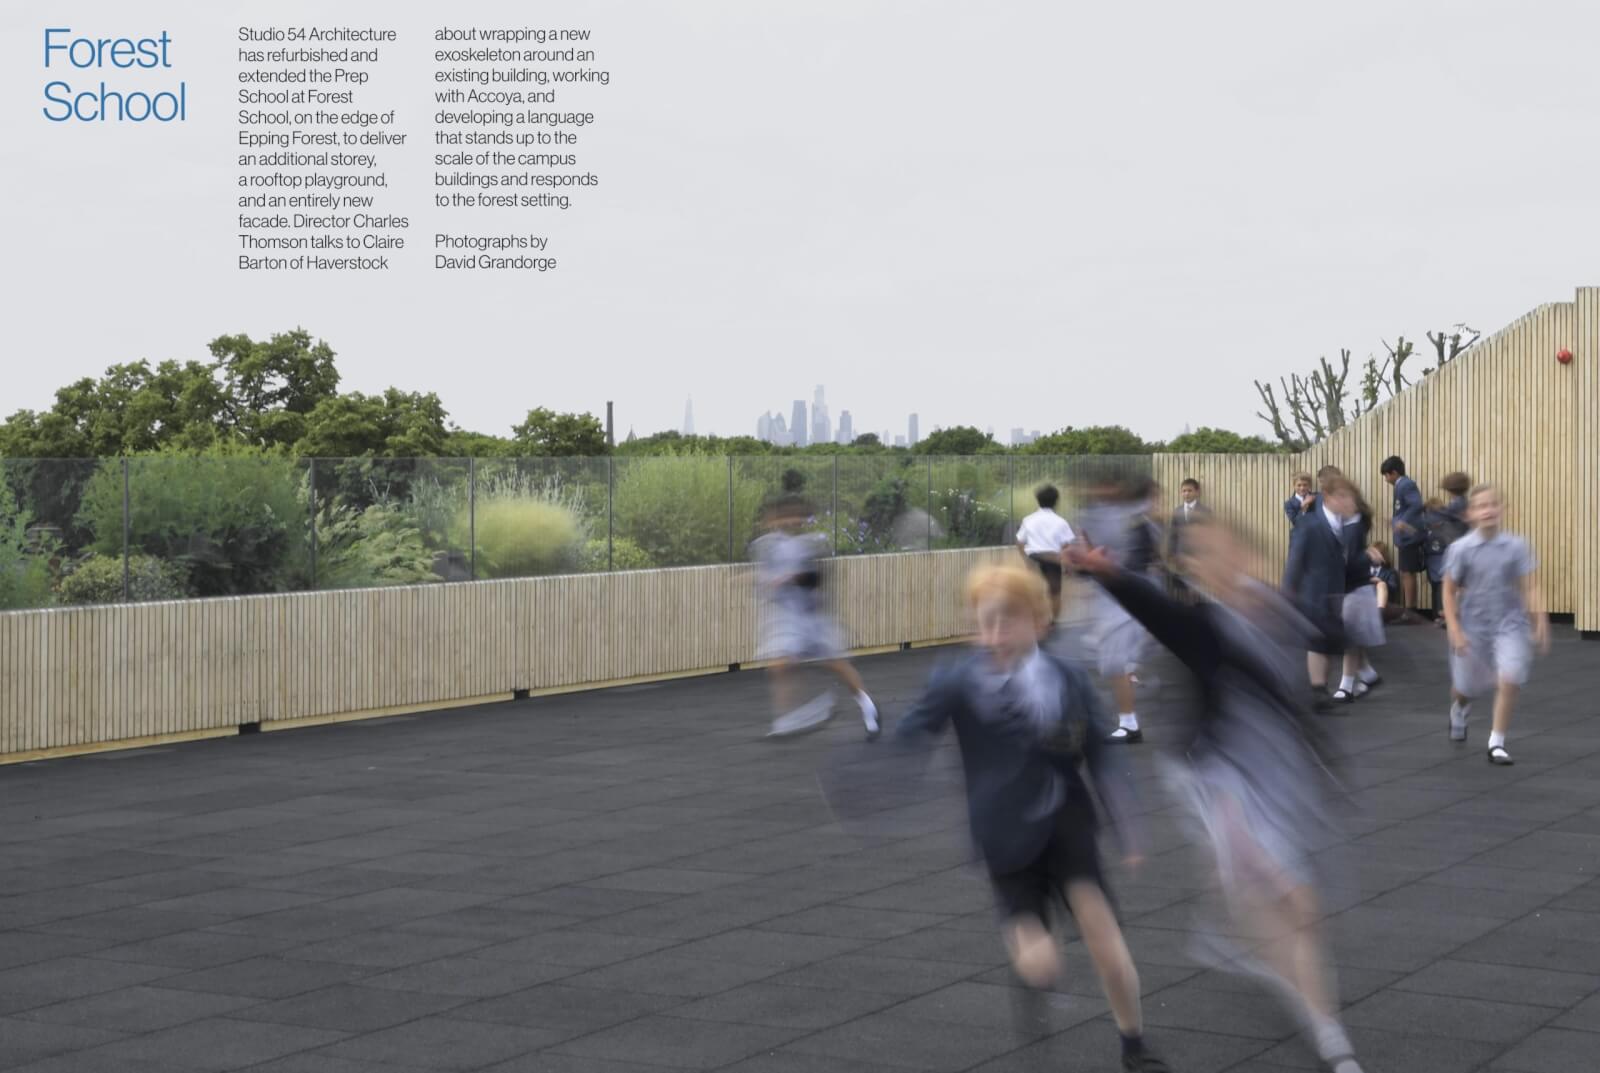 Forest School (Prep) Featured in Architecture Today